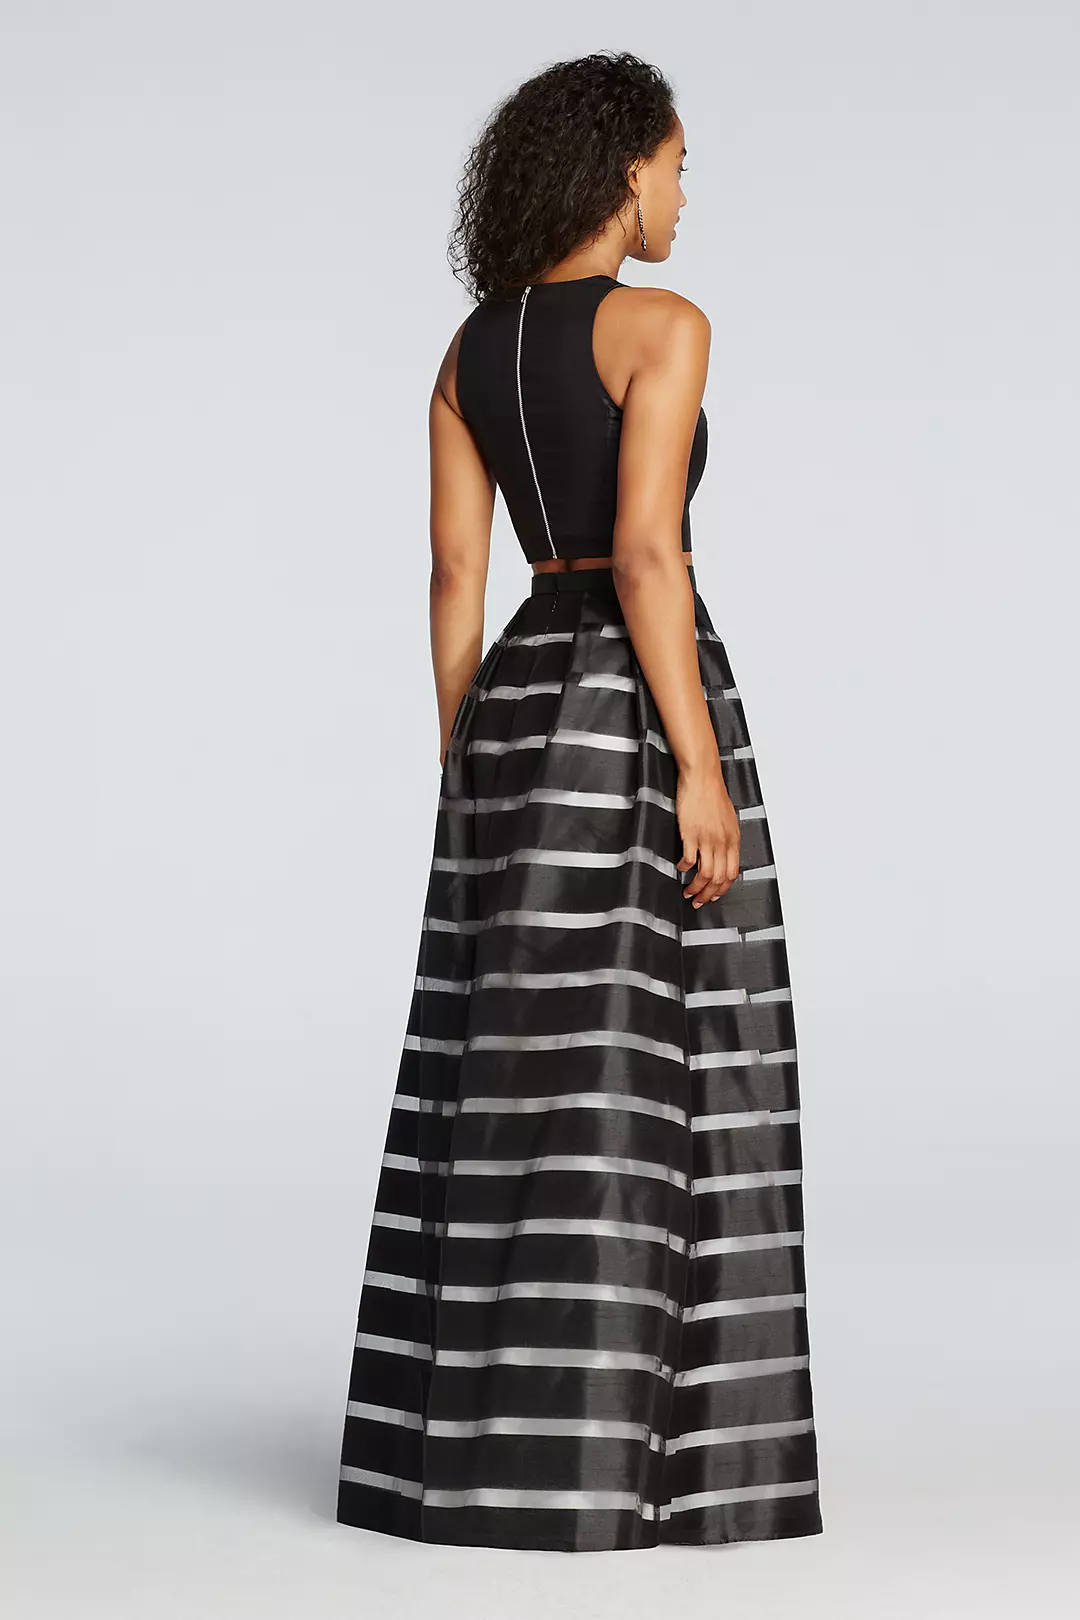 Two Piece Prom Crop Top with Striped Satin Skirt Image 2